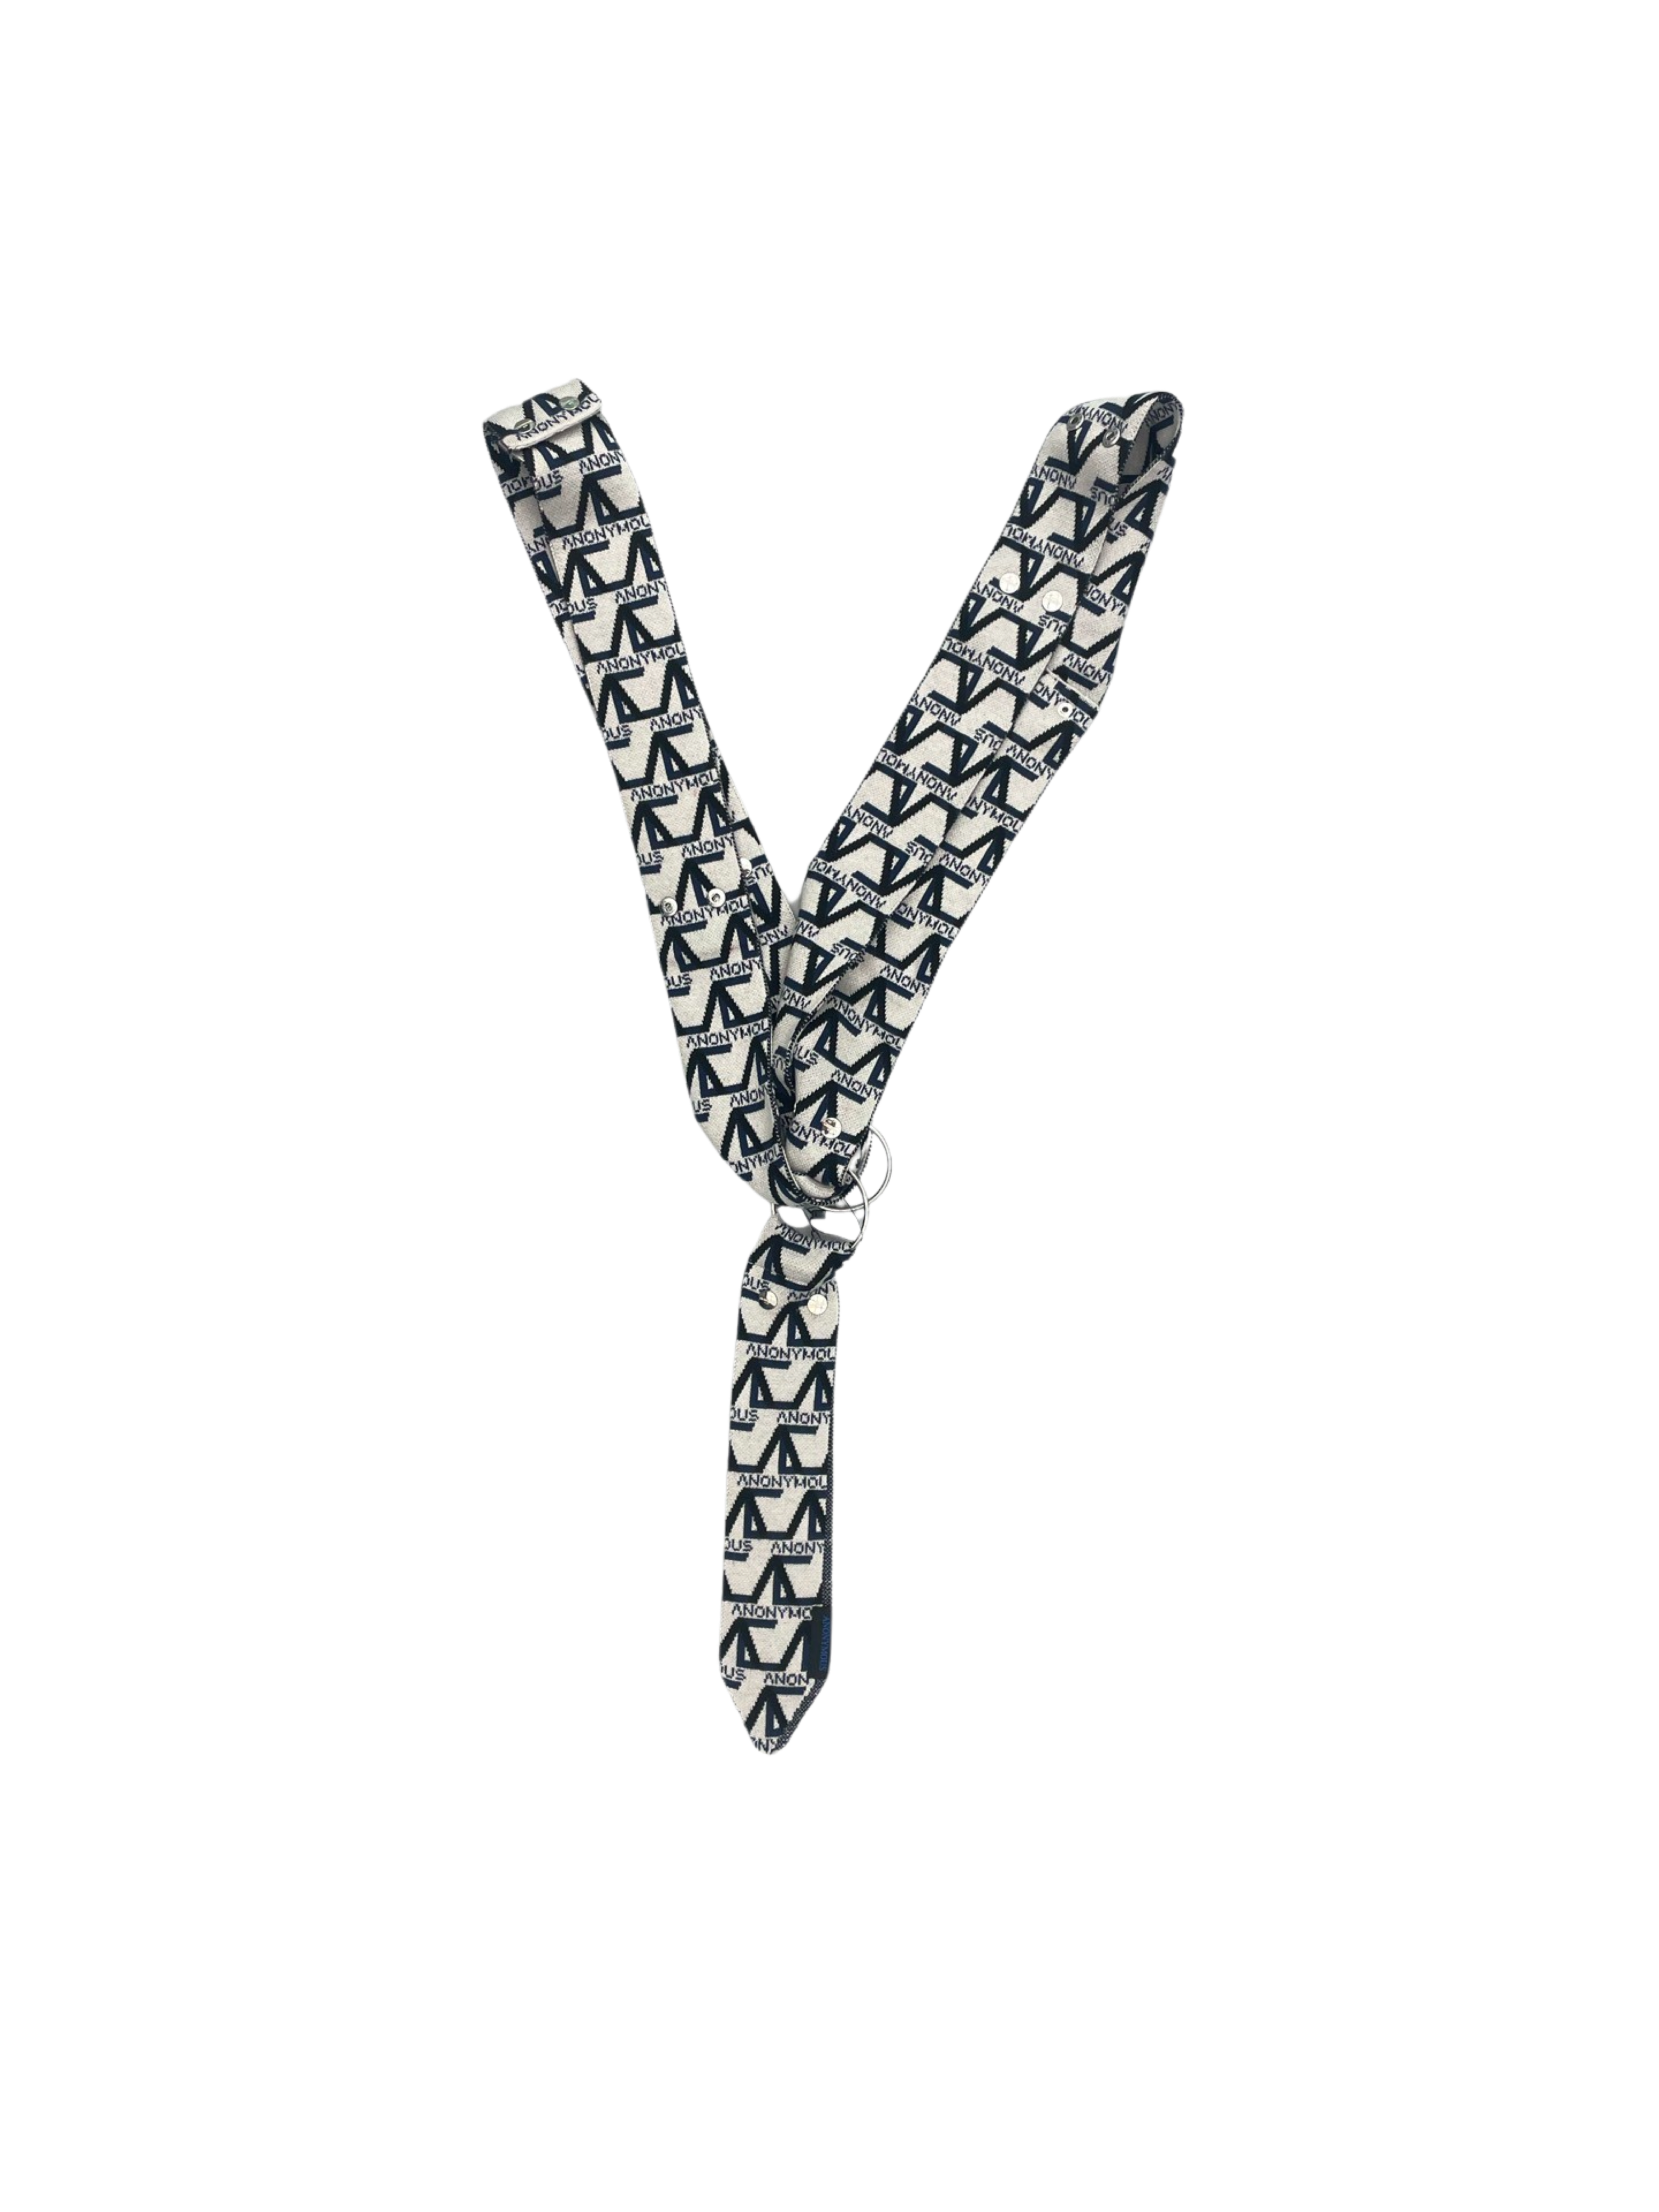 ANONYMOUS KNIT HARNESS TIE GRAY